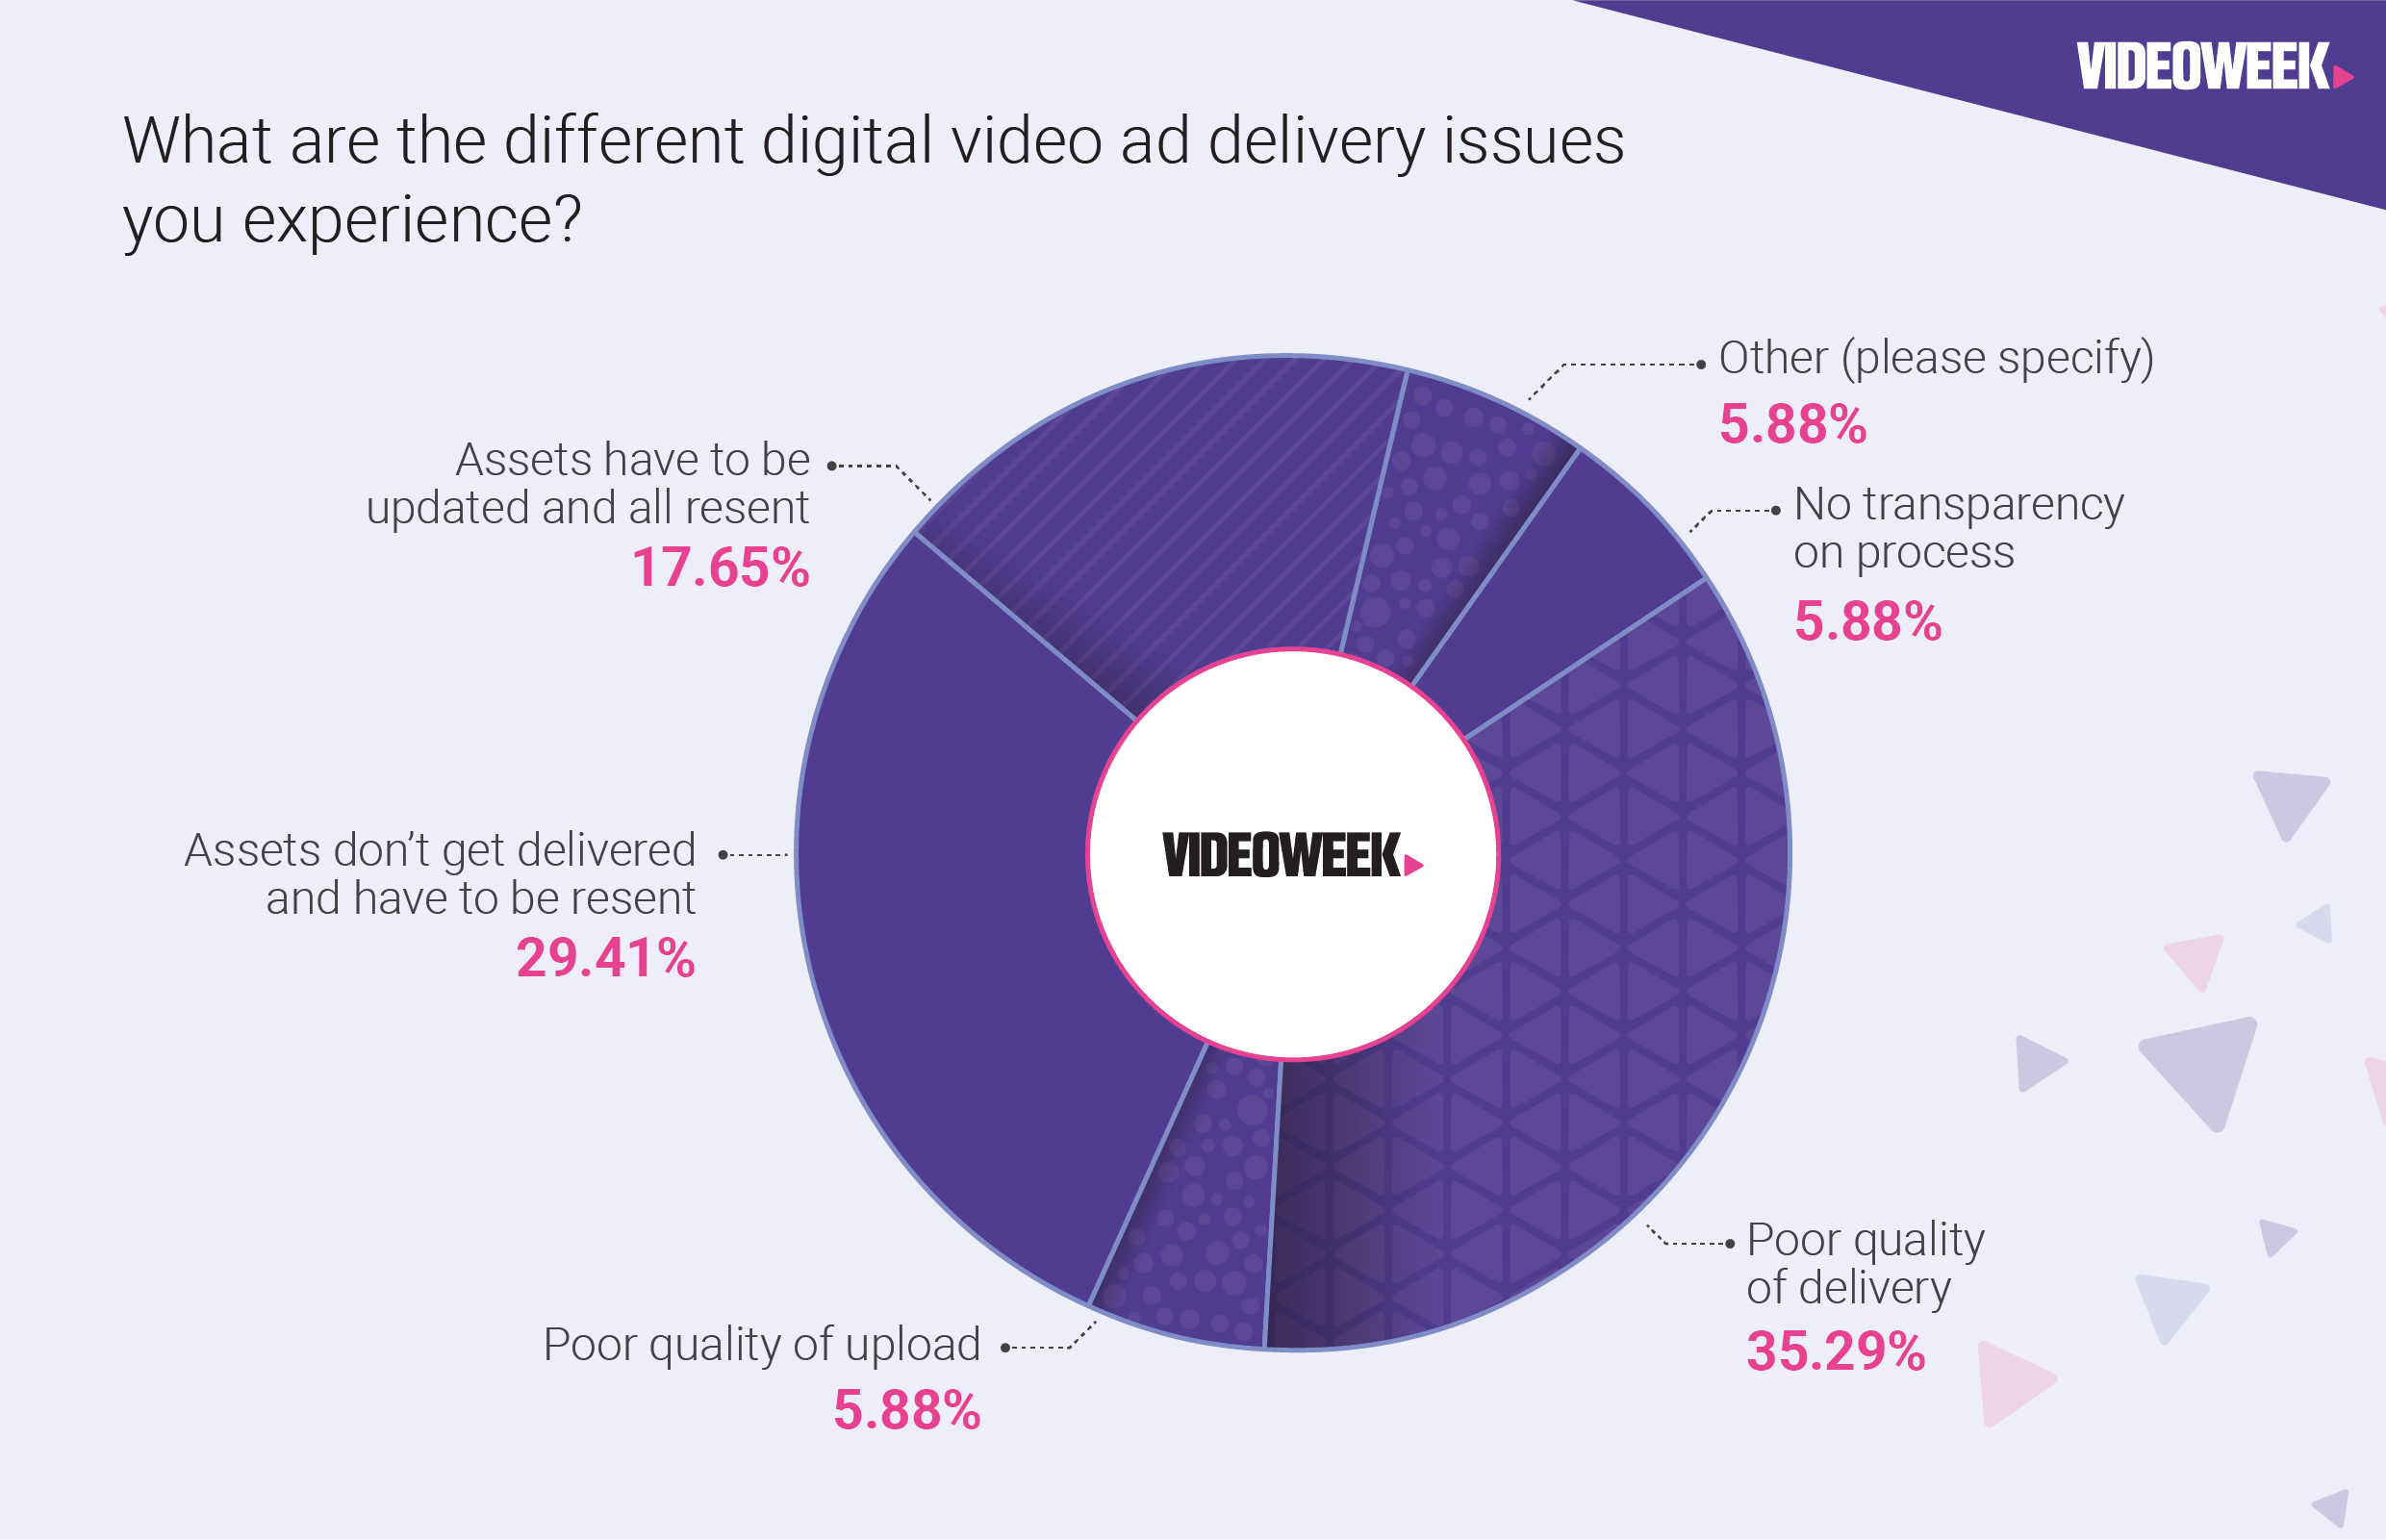 What are the different digital video ad delivery issues you experience?